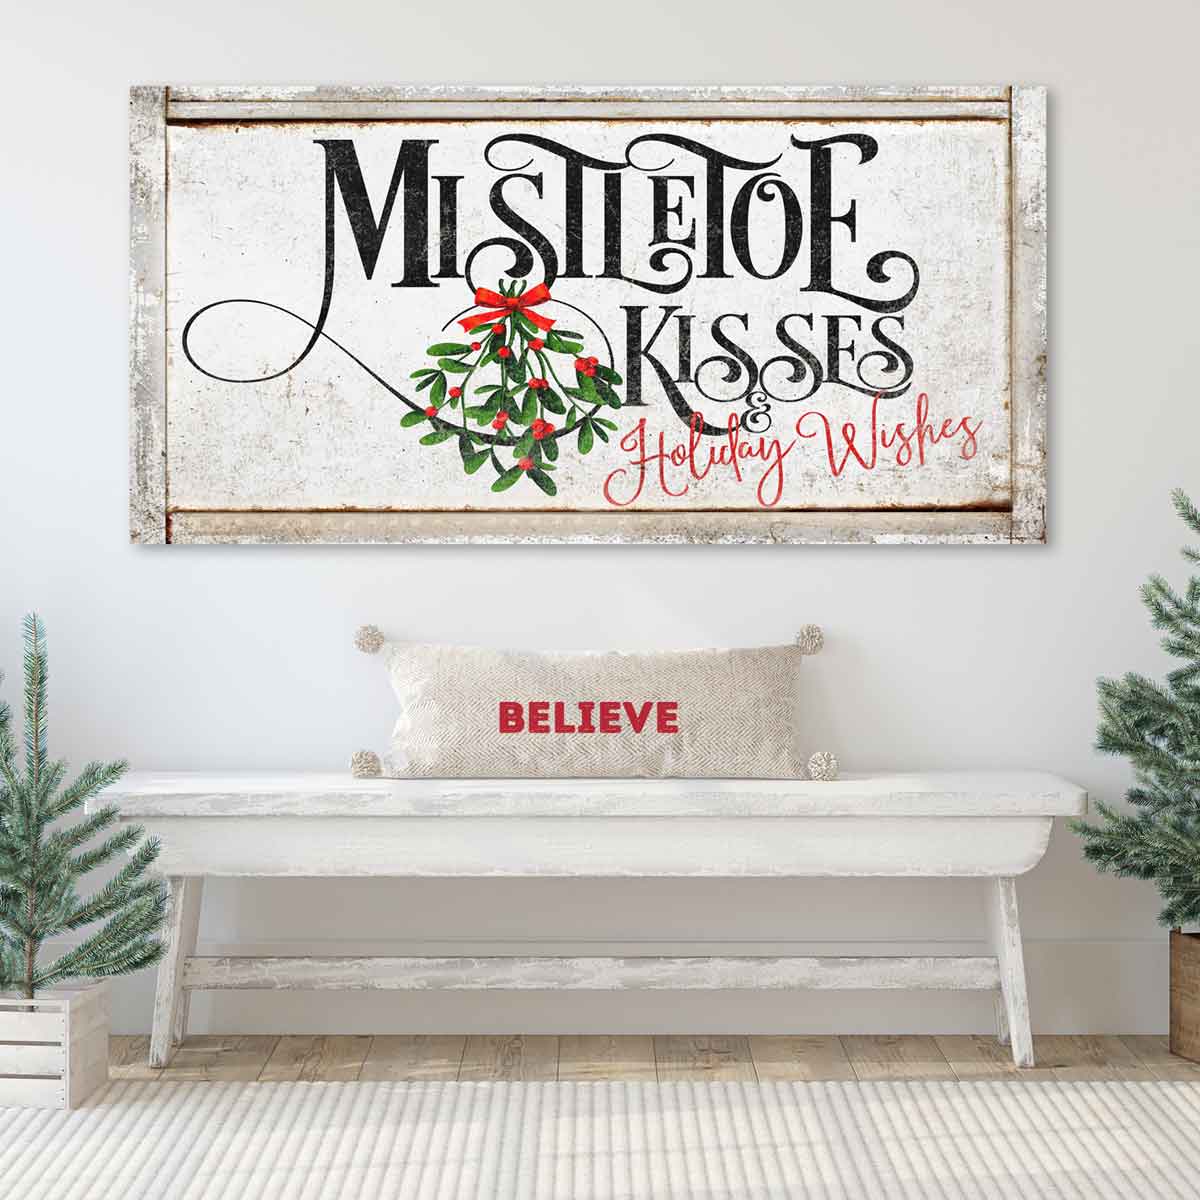 Mistletoe Kisses and Holiday Wishes on white distressed Background